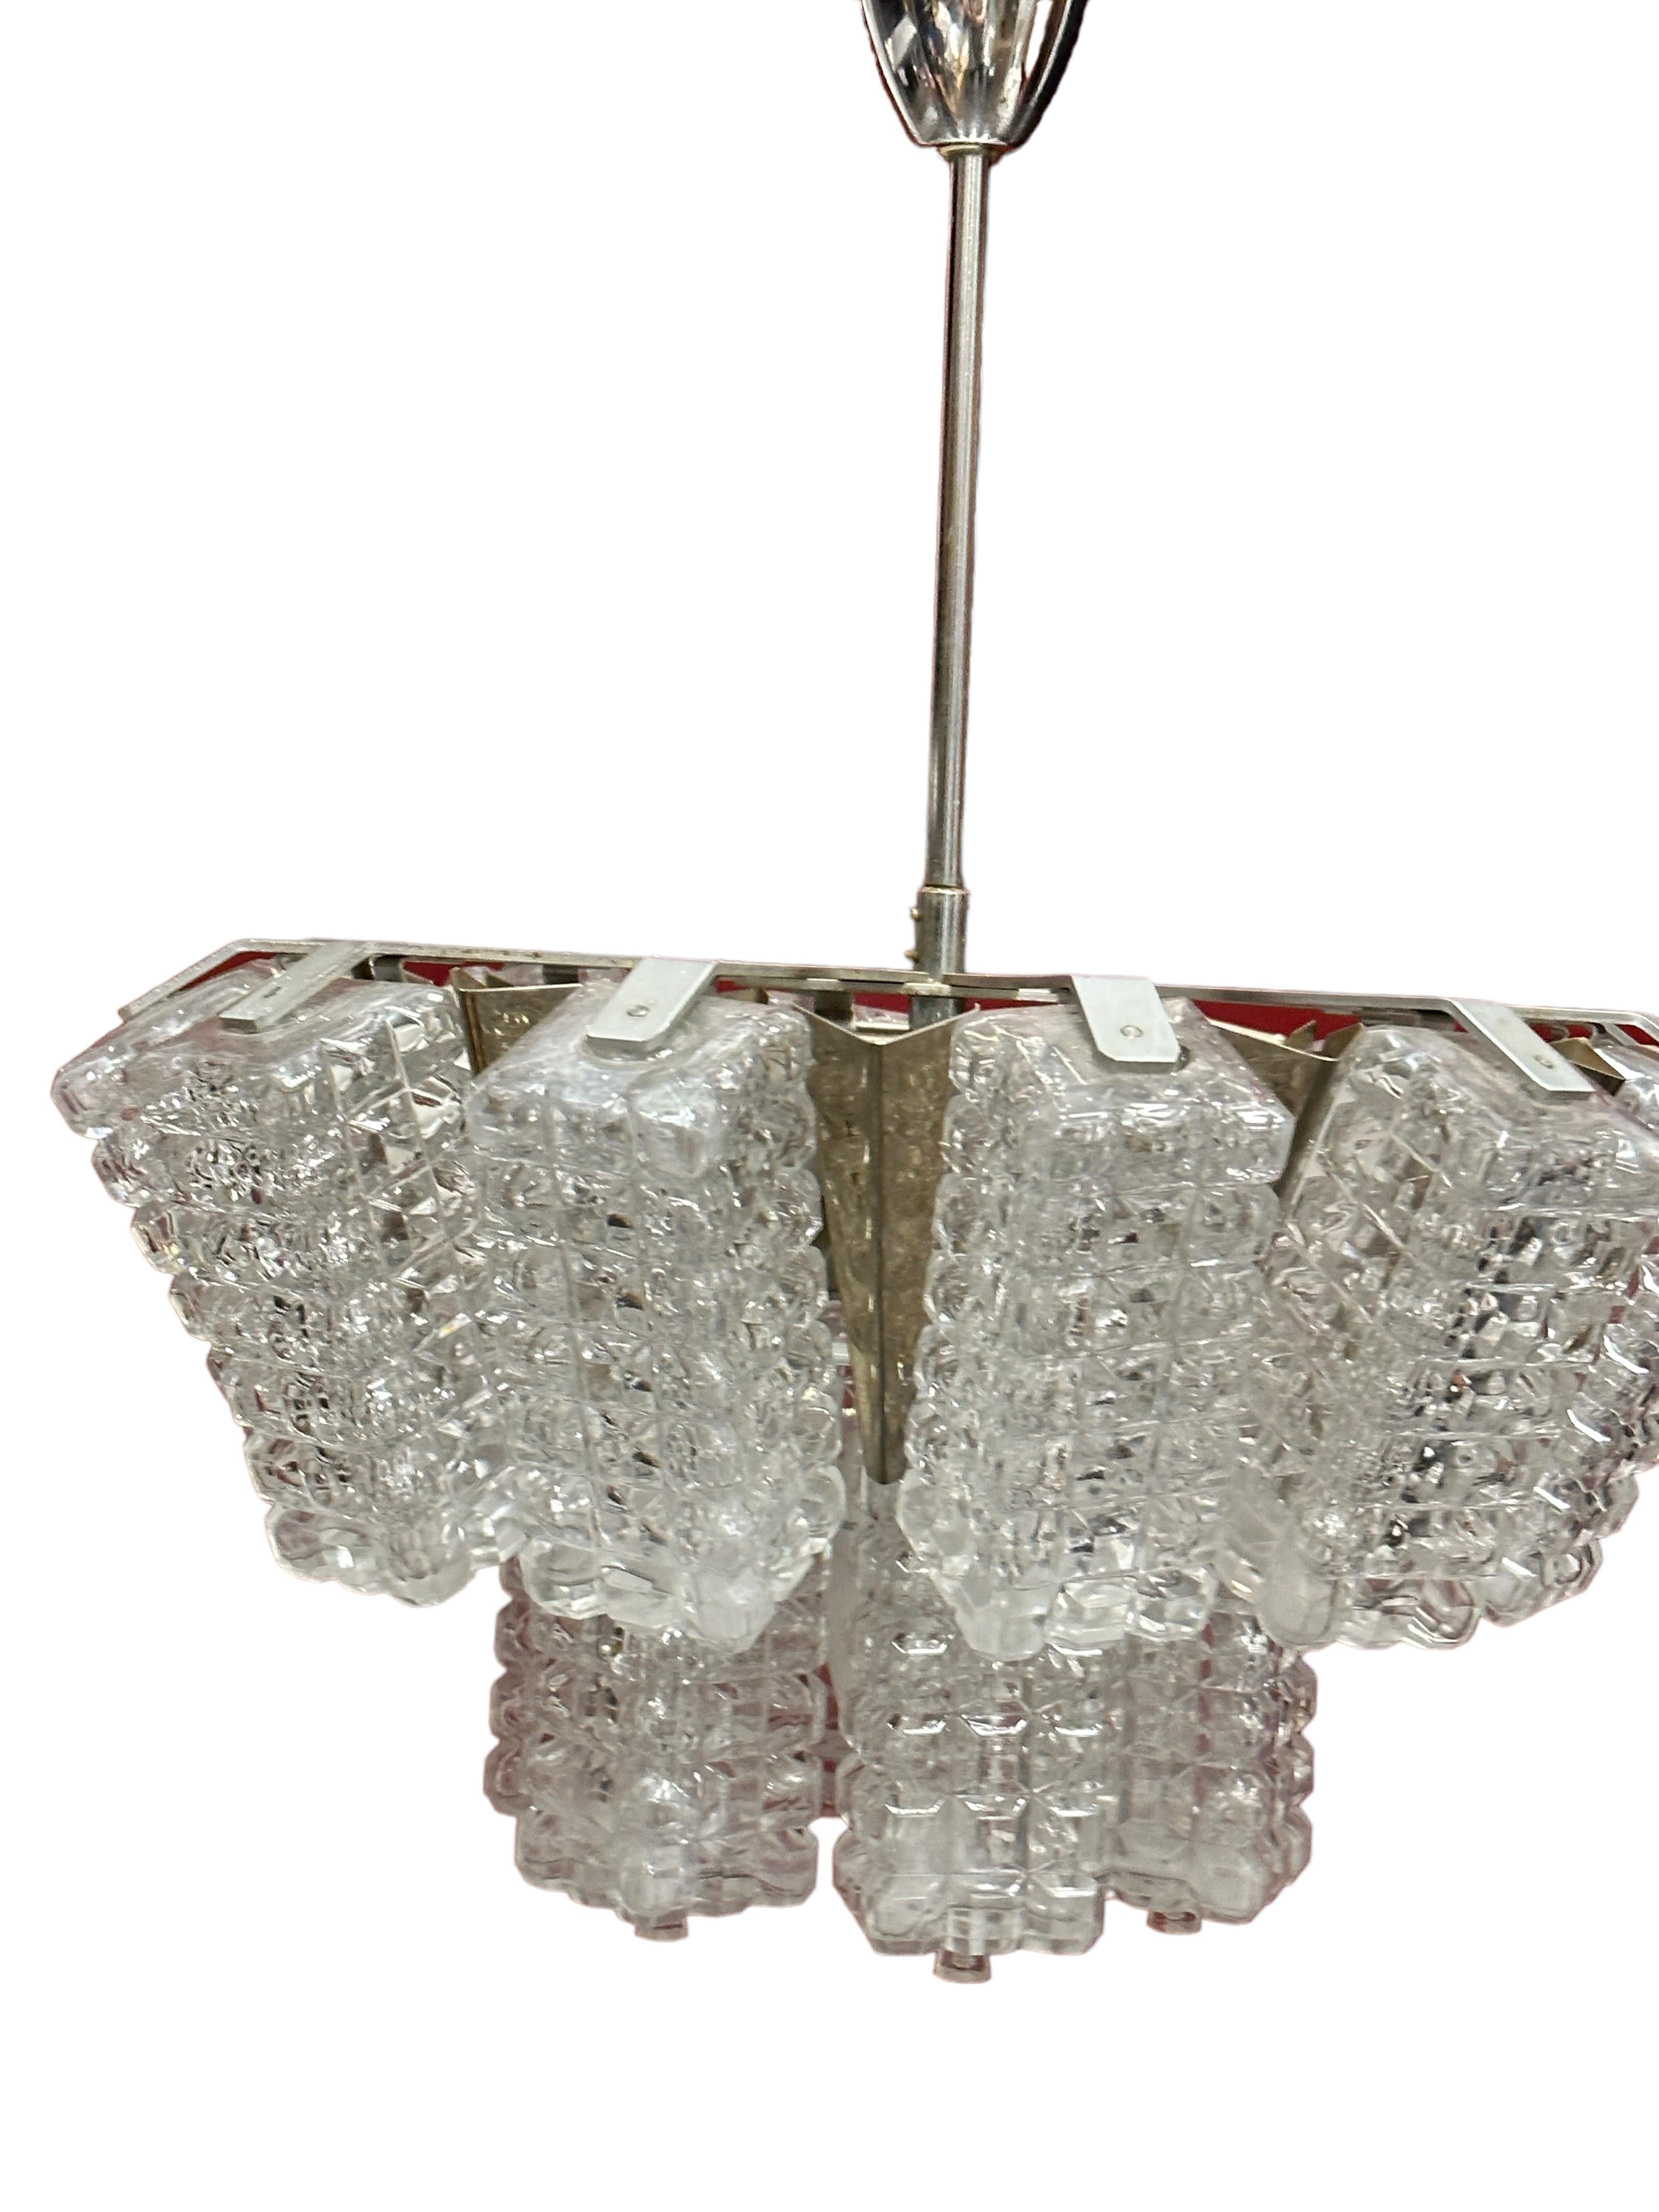 Pair of Two Tiered Glass Cube Chandelier by Austrolux, Austria, 1960s For Sale 8